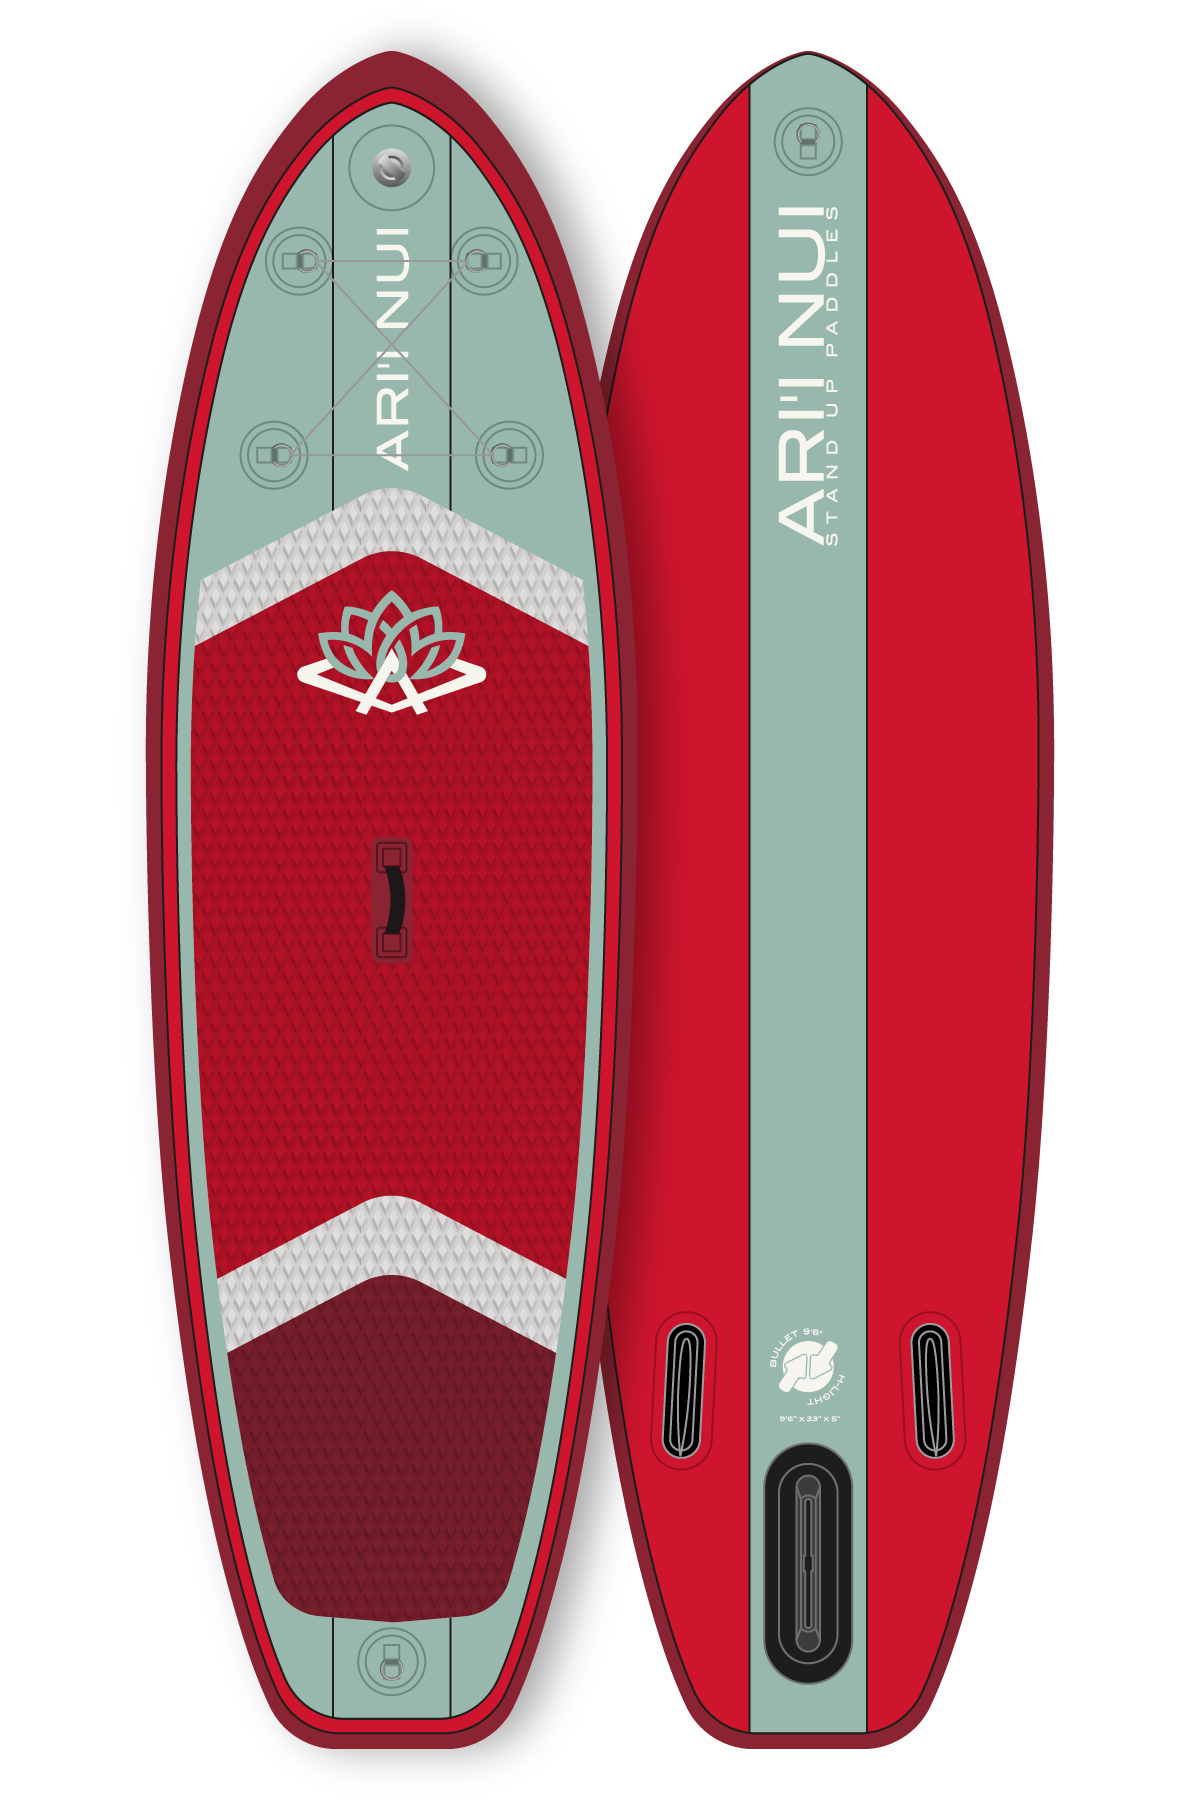 BULLET 9'6" - SUP gonflable